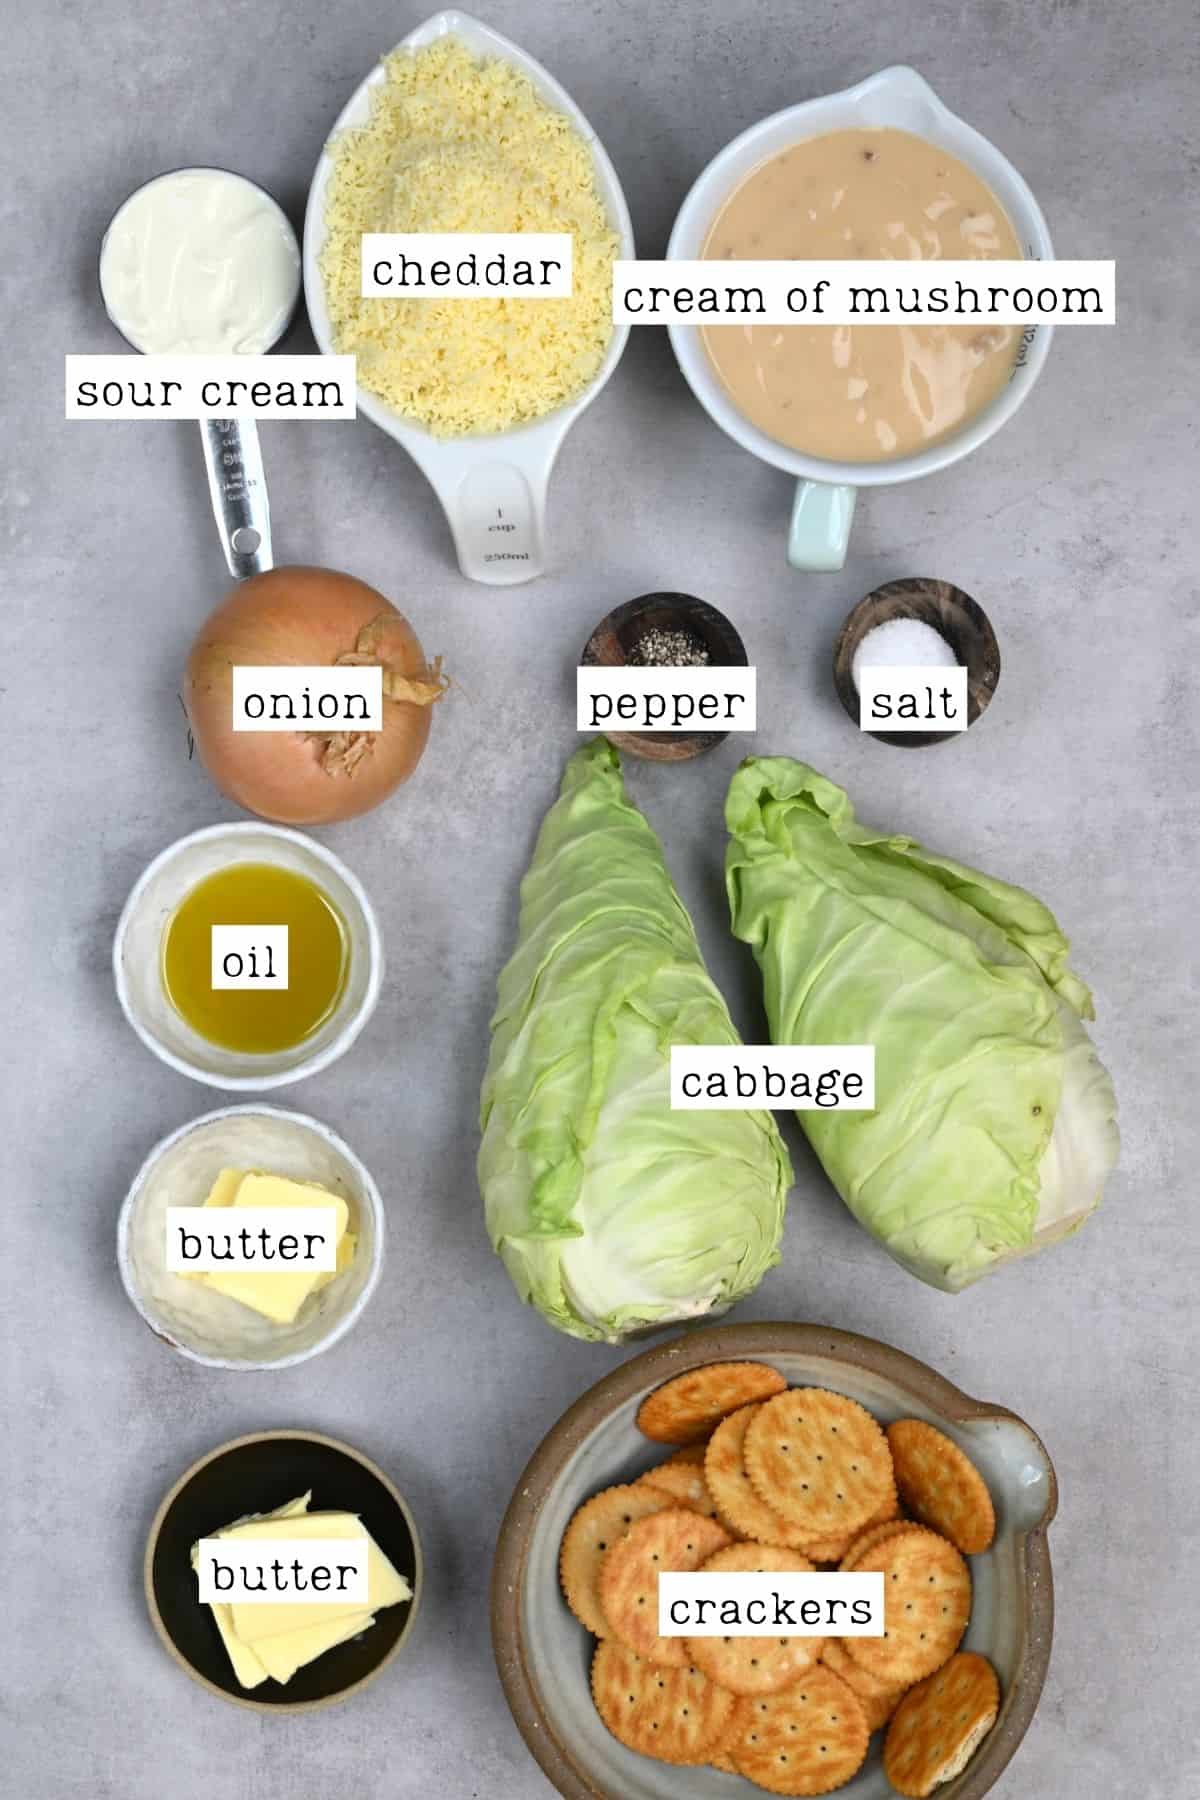 Ingredients for cabbage casserole